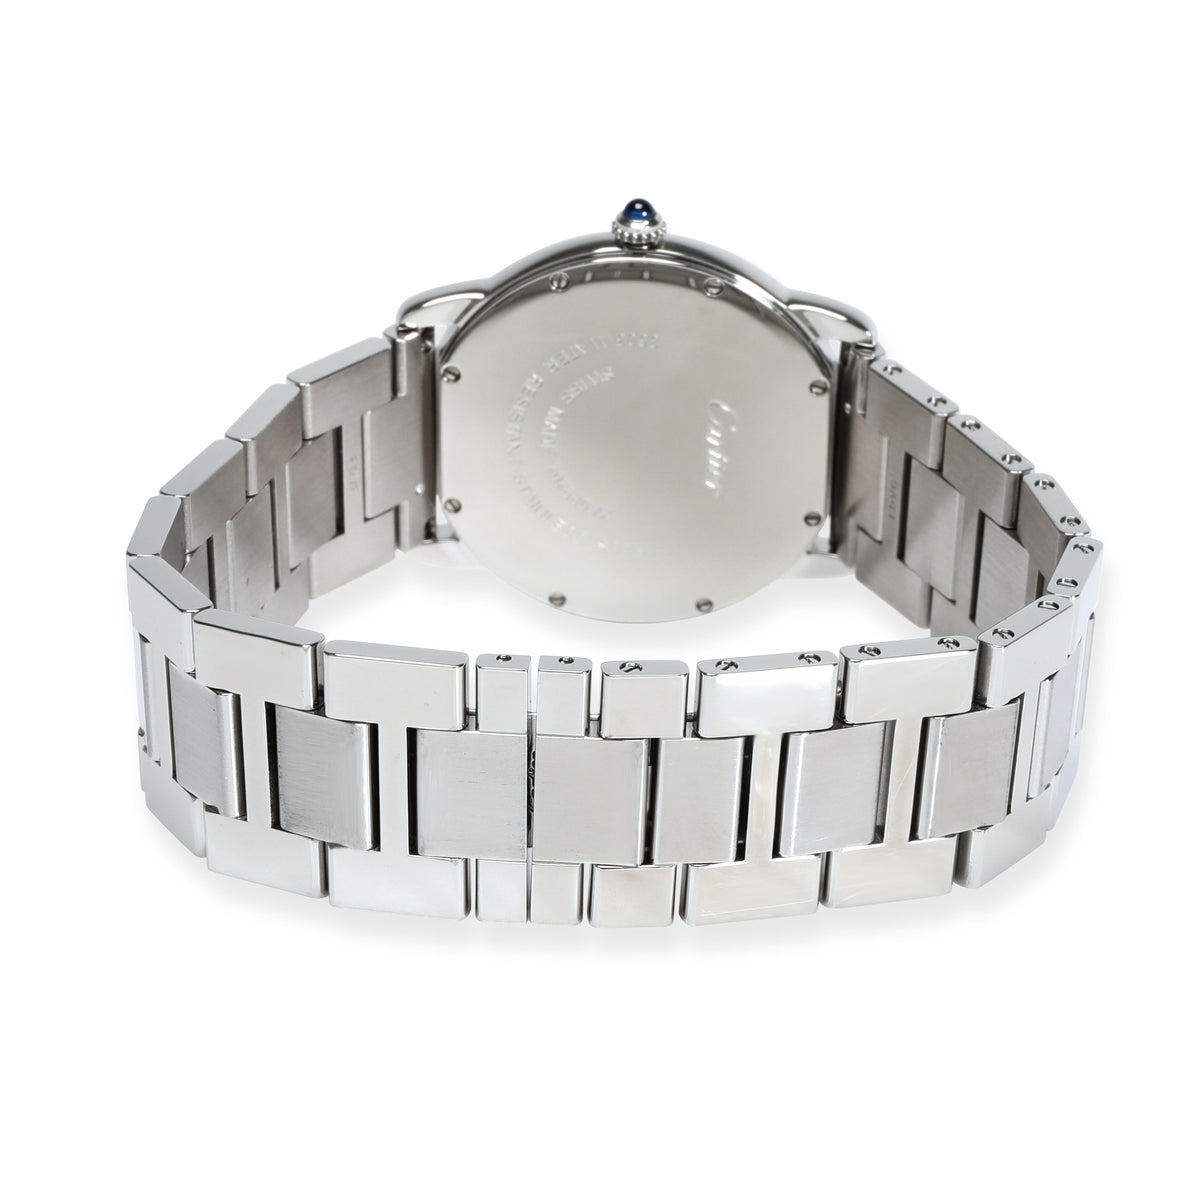 Cartier Ronde Solo W6701005 Unisex Watch in  Stainless Steel